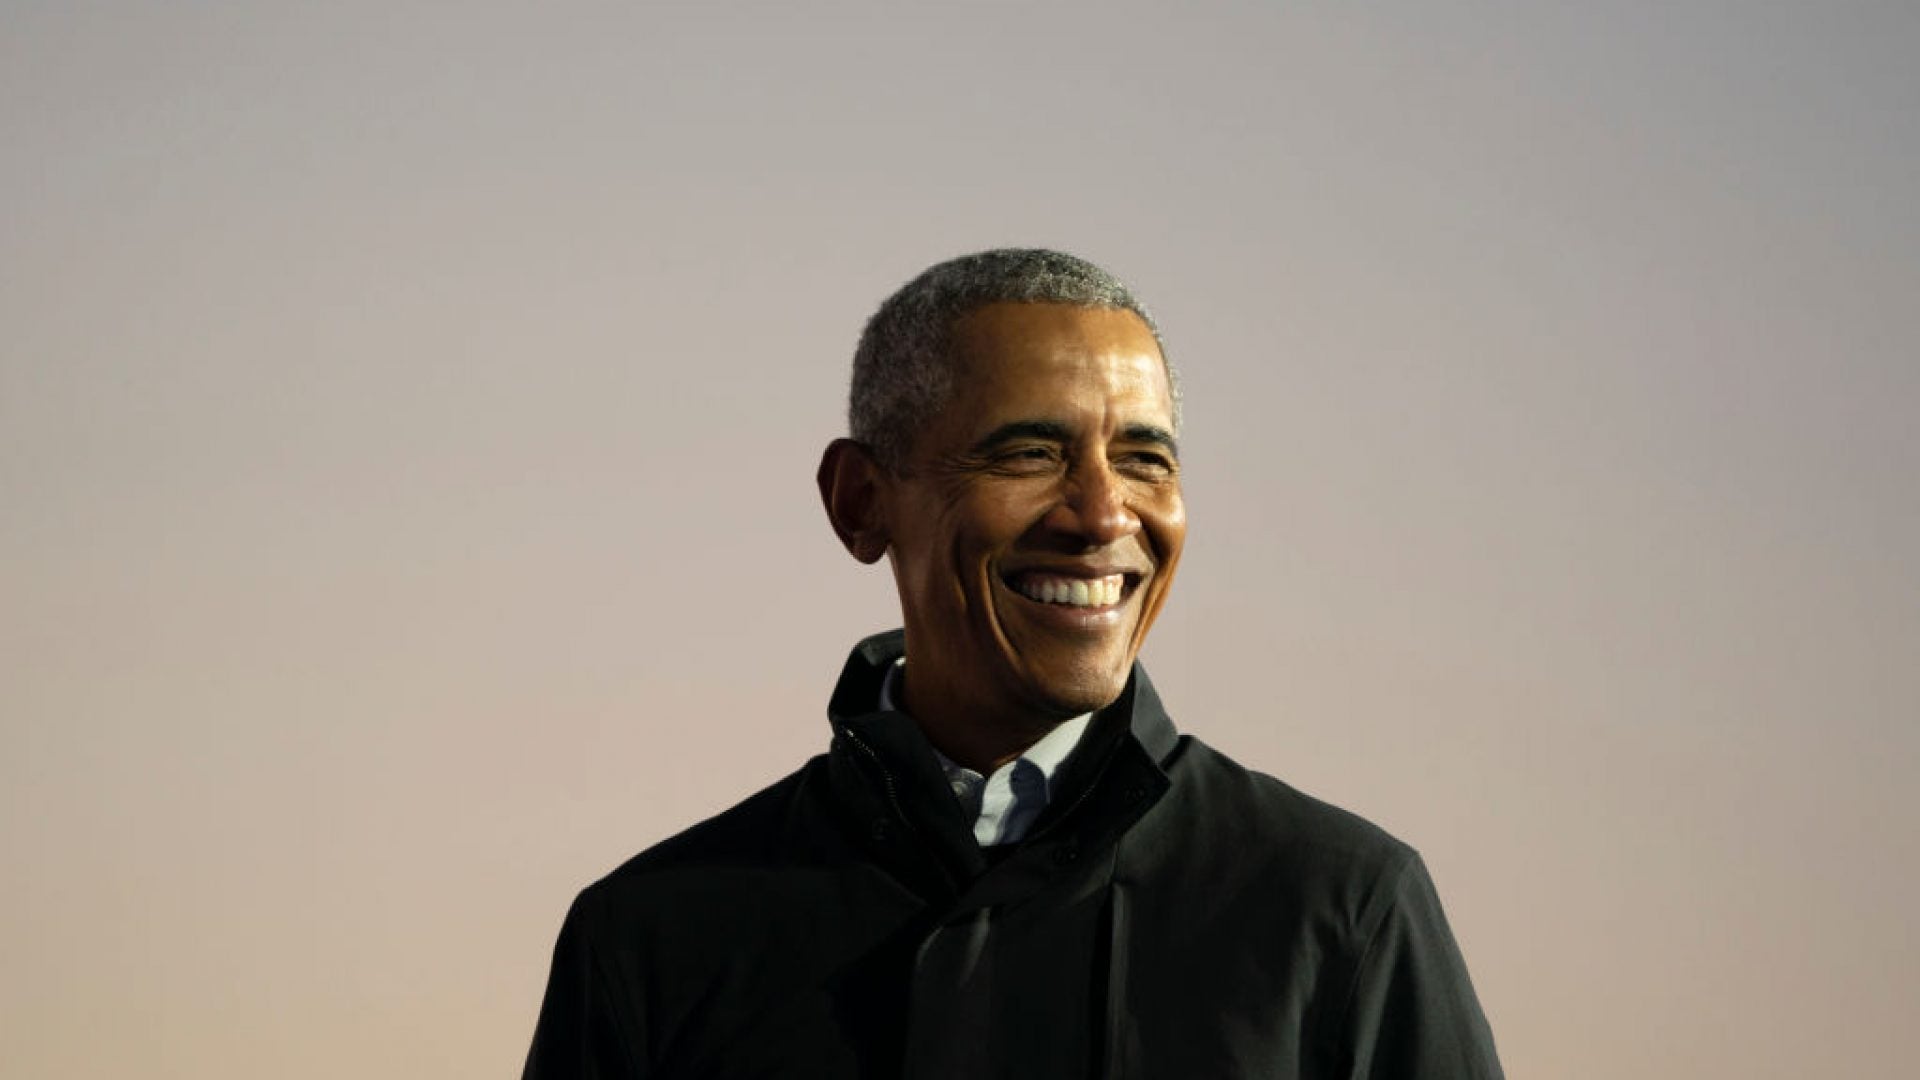 Barack Obama’s 'A Promised Land' Playlist Includes Songs That Inspired Him During His Presidency